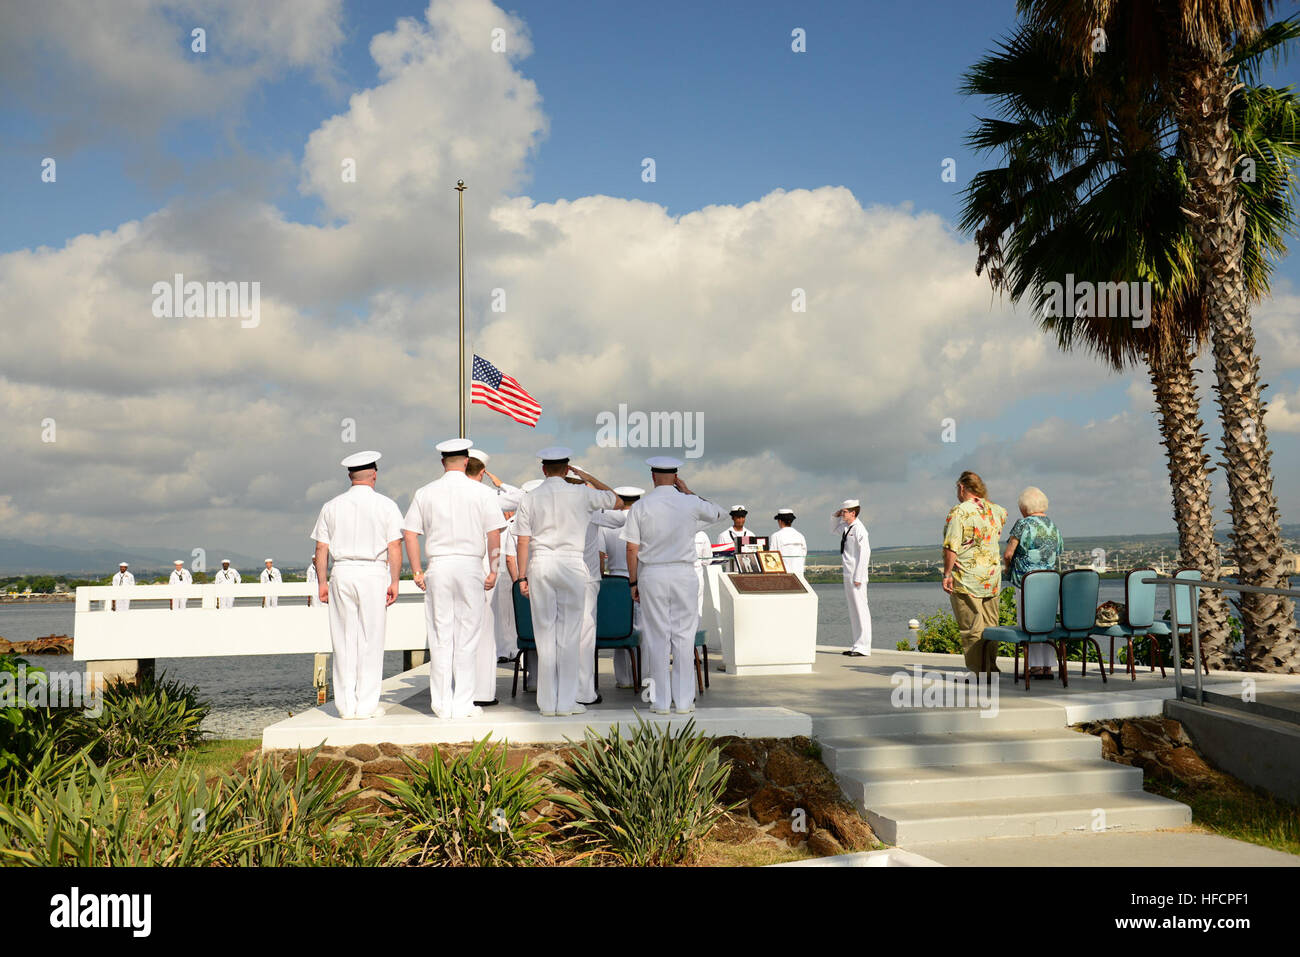 PEARL HARBOR (Jan. 27, 2016) Family members and military guests of the late Pearl Harbor survivor Coxswain John S. Pidcock attend an ash-scattering ceremony at the USS Utah Memorial on Ford Island, Joint Base Pearl Harbor-Hickam. Pidcock was stationed aboard the USS Tangier (AV-8) during the 1941 Japanese attacks on Pearl Harbor. His ashes, along with his wife Bonnie’s ashes, joined the remains of the Sailors still aboard USS Utah, which was sunk during the 1941 attacks. (U.S. Navy photo by Mass Communication Specialist 1st Class Meranda Keller/ Released) Pearl Harbor Survivor Remembered 16012 Stock Photo